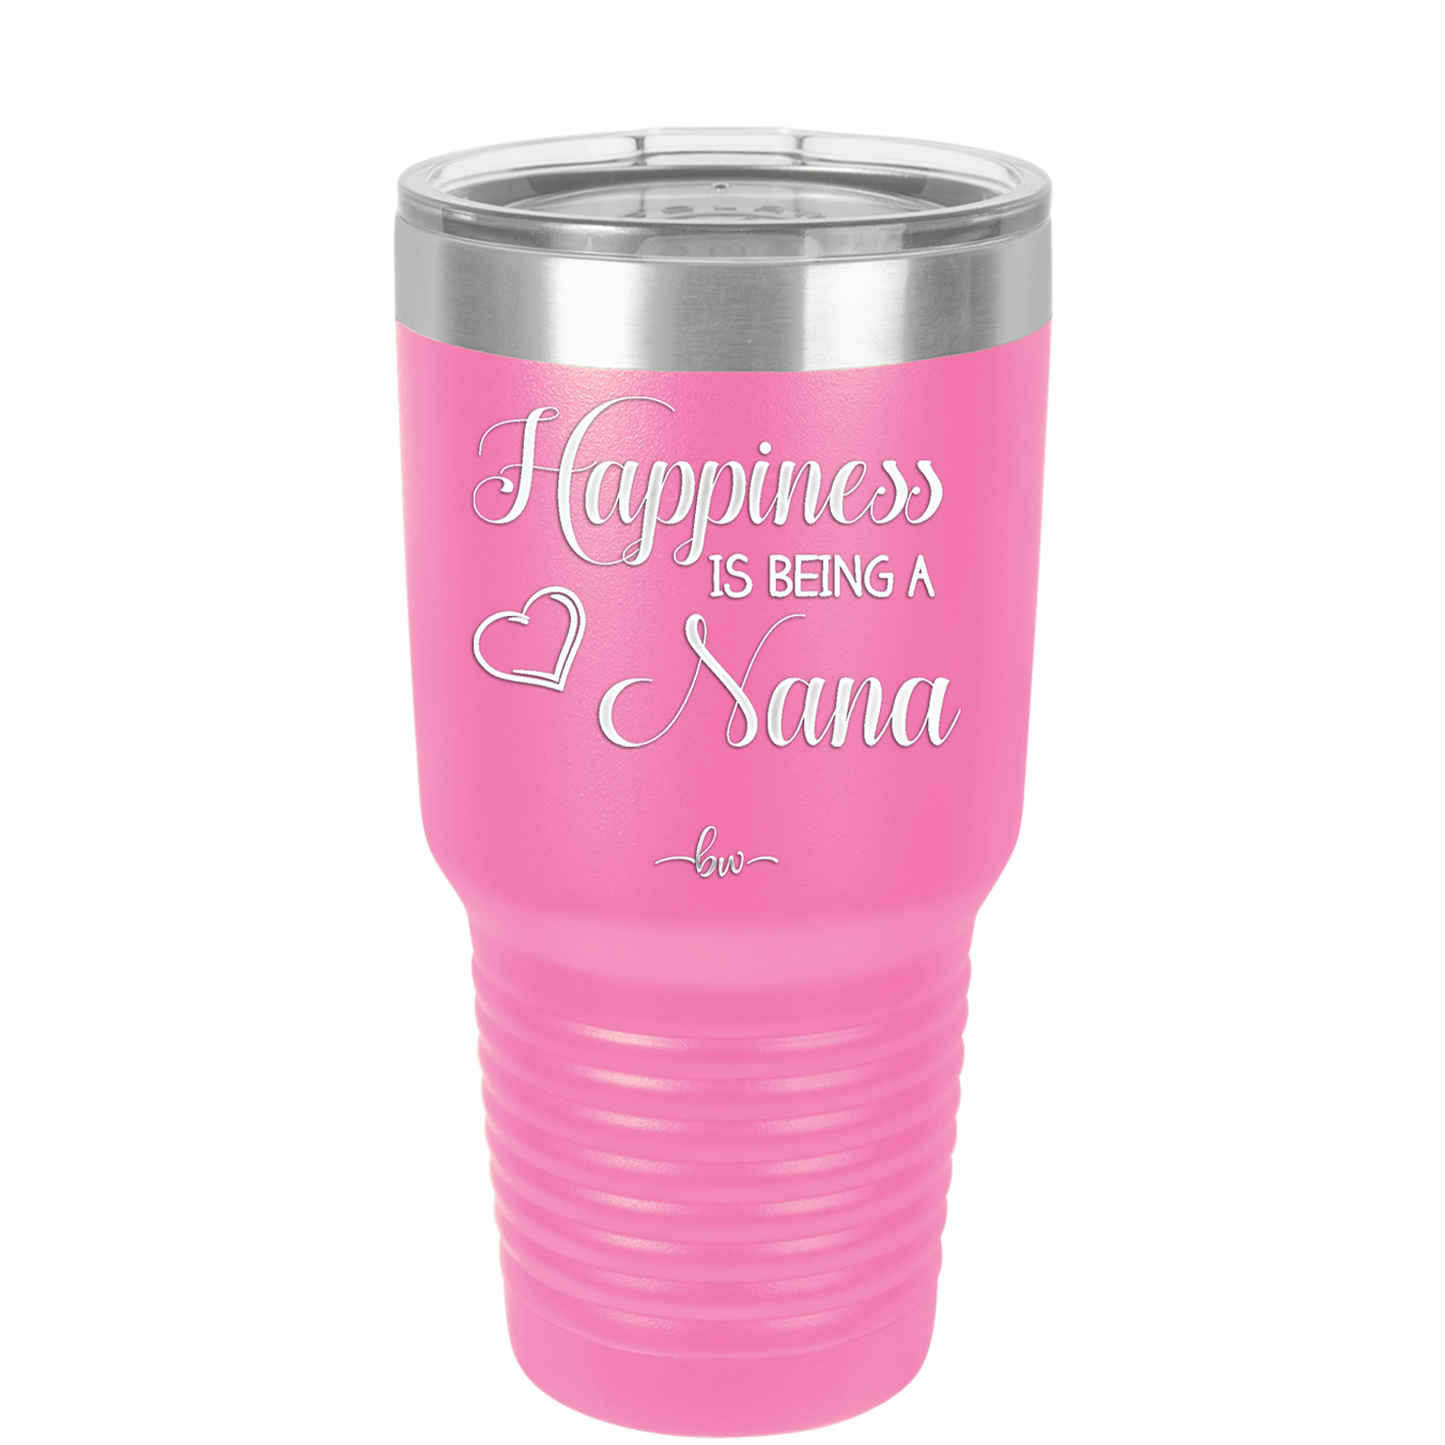 Happiness is Being a Nana - Laser Engraved Stainless Steel Drinkware - 1550 -